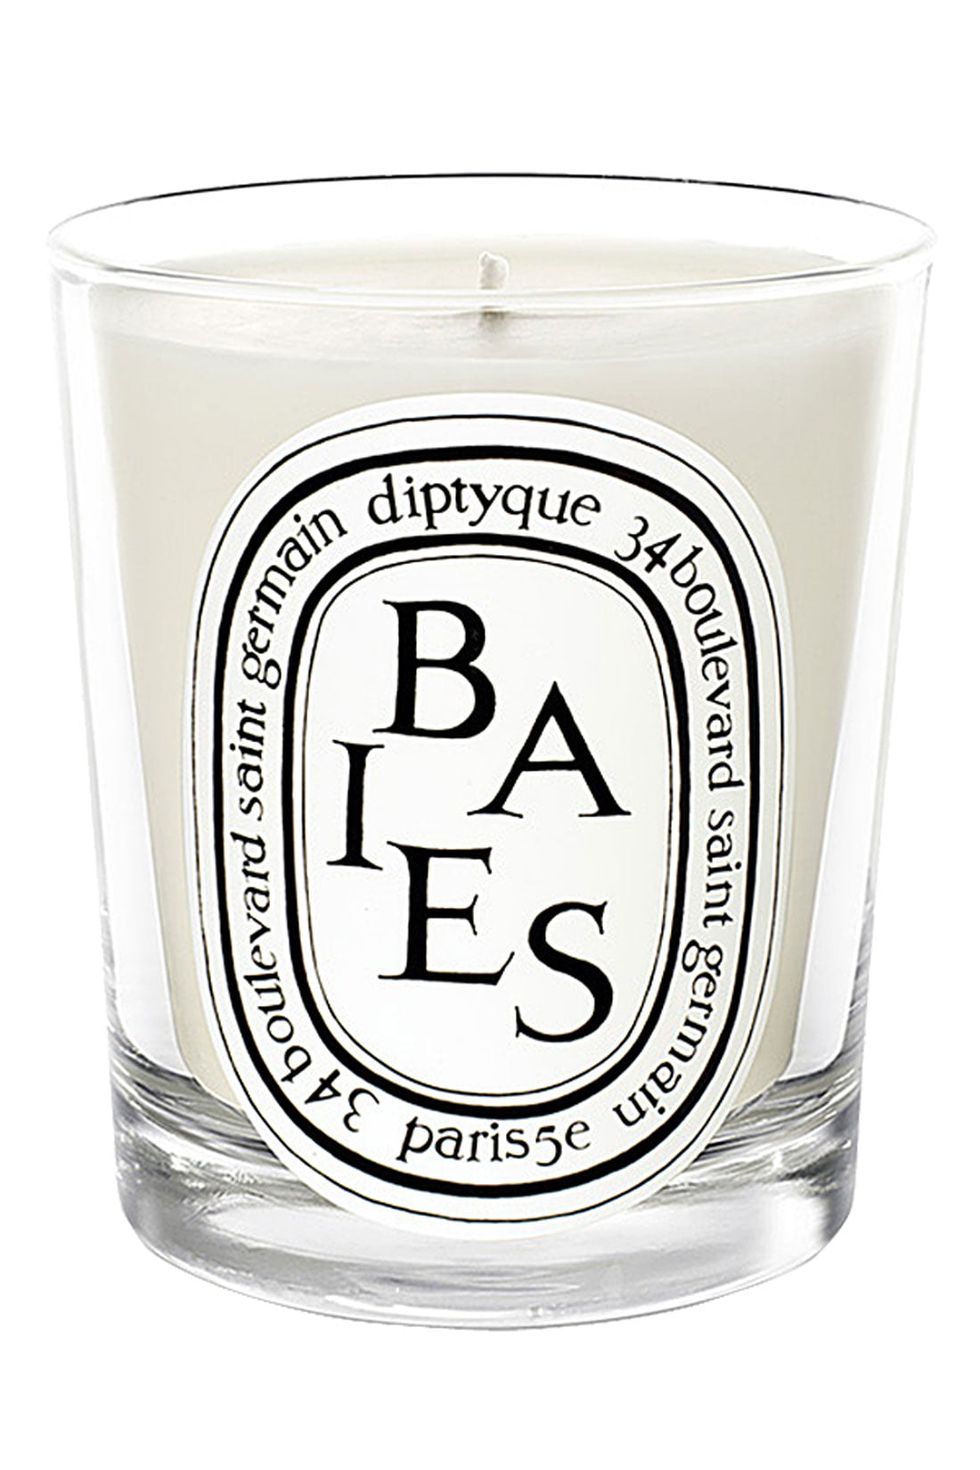 Diptyque Baies scented candle